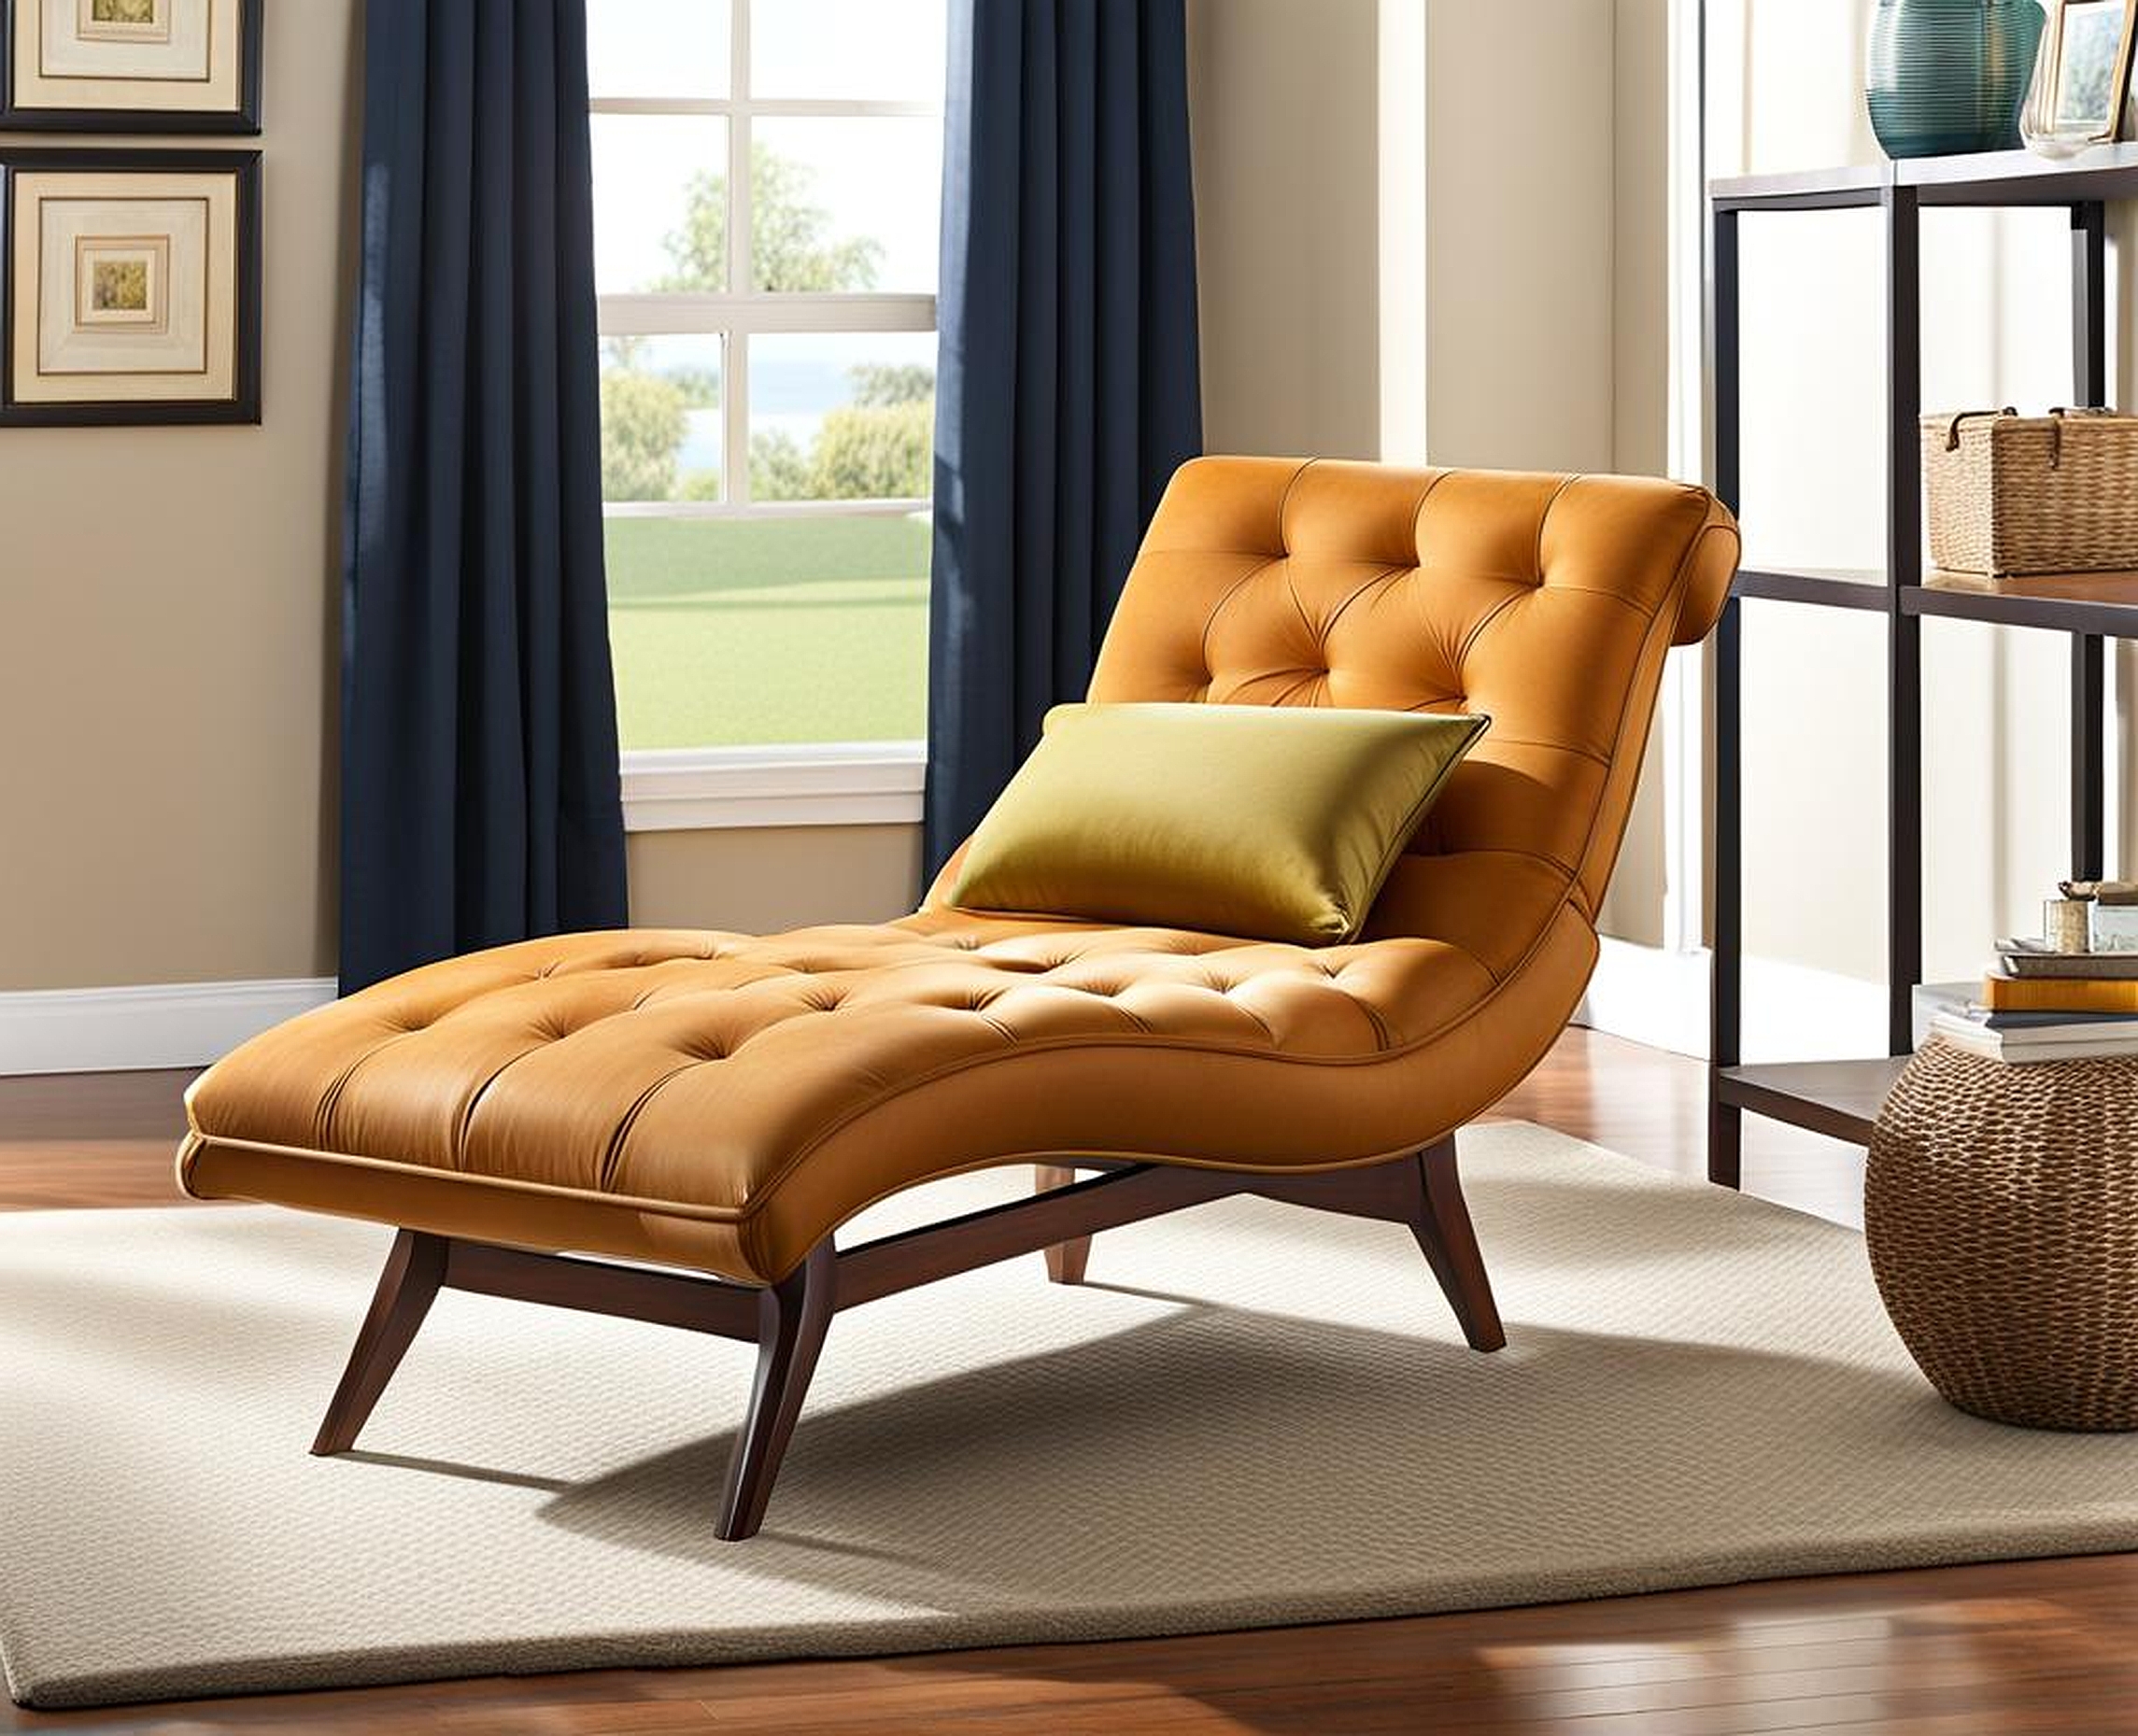 Small Indoor Chaise Lounge Chair for Compact Living Spaces